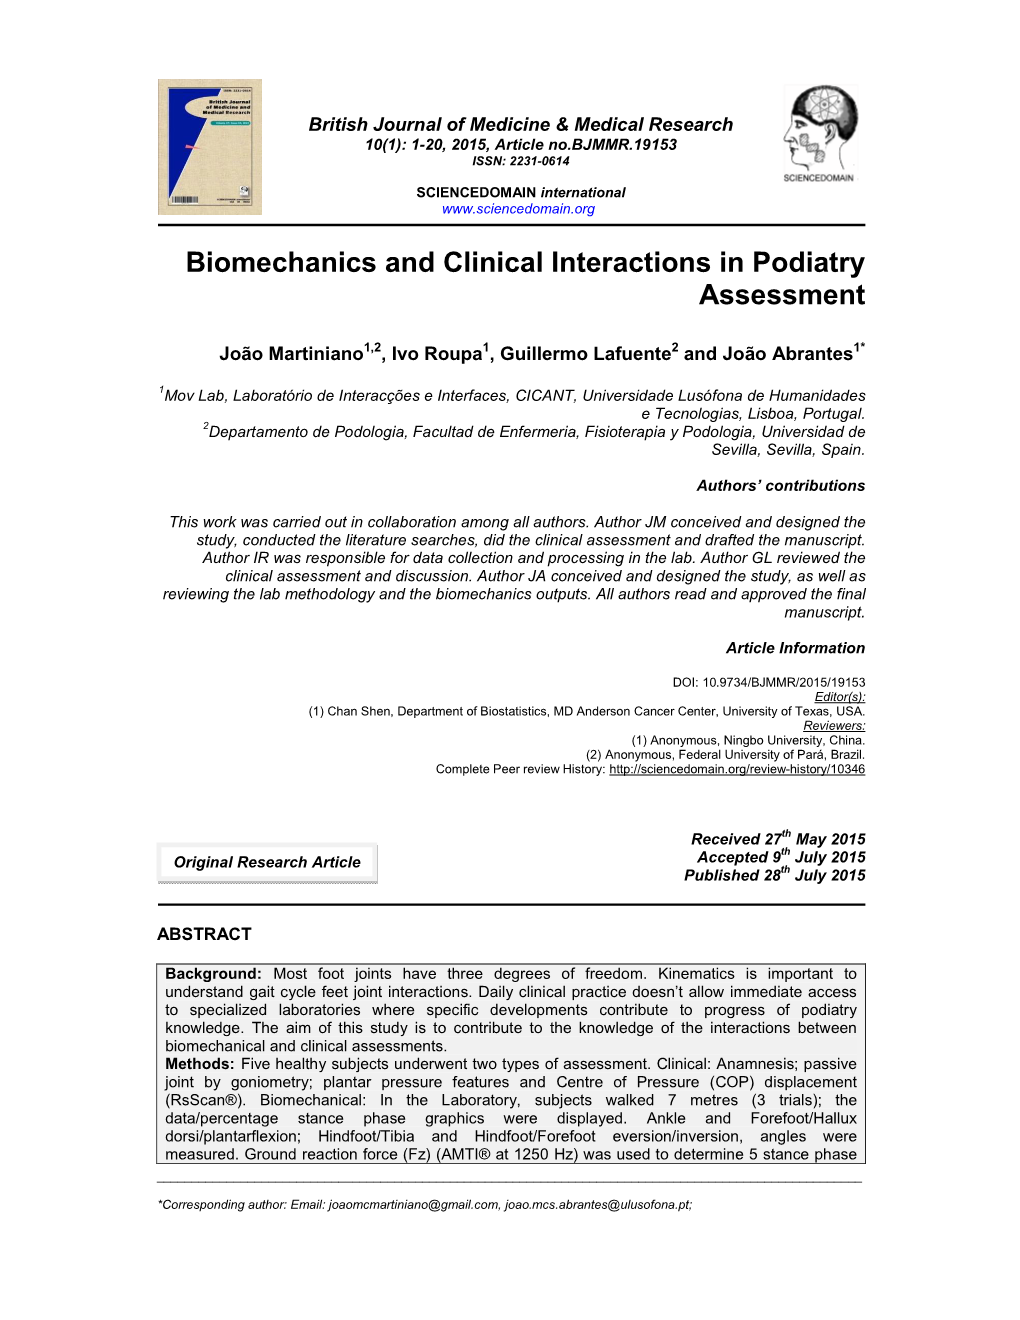 Biomechanics and Clinical Interactions in Podiatry Assessment